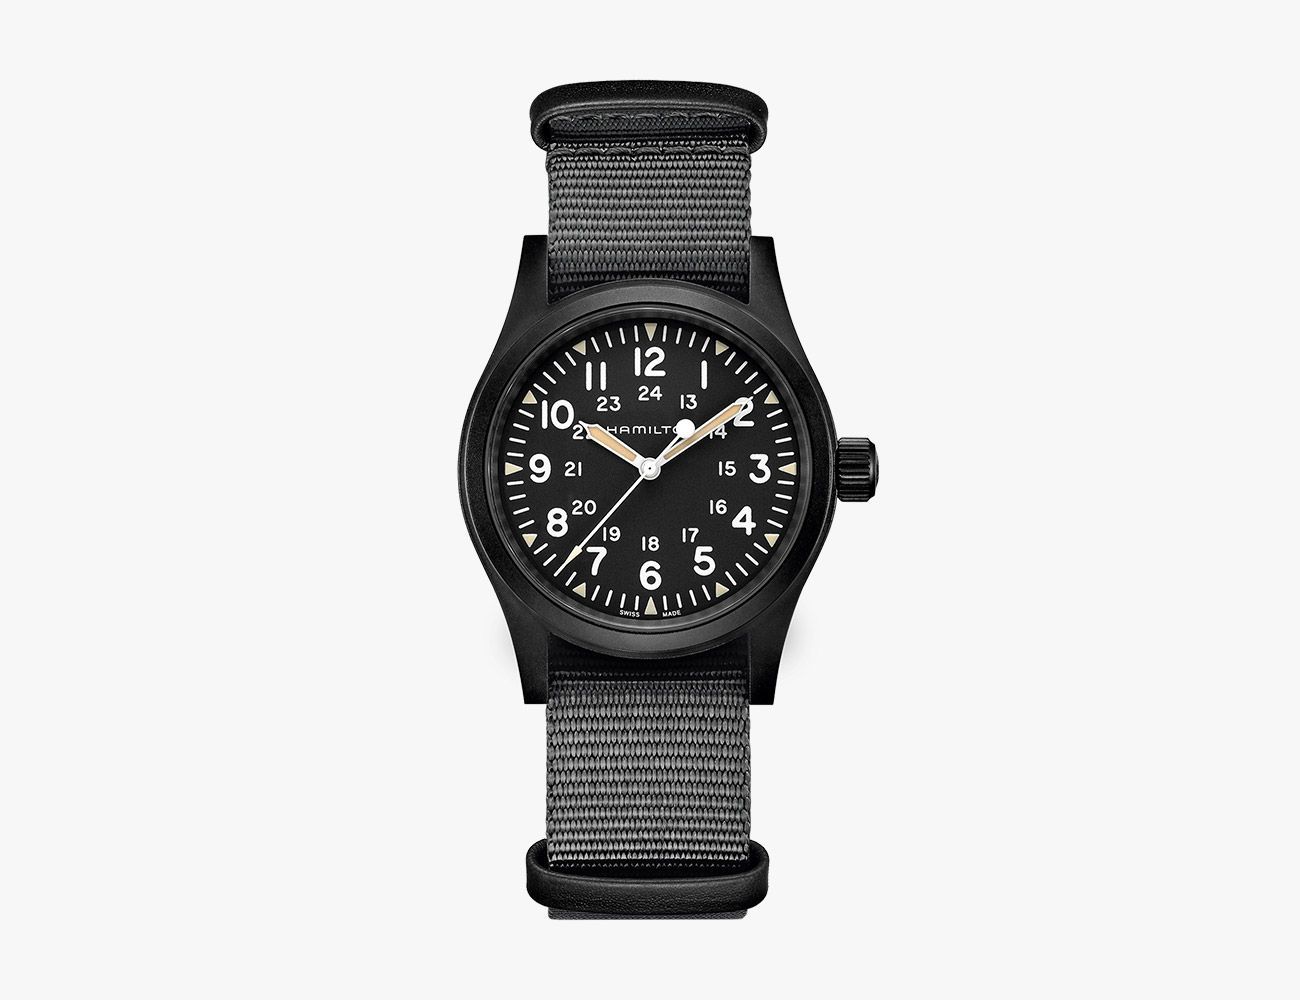 21 Best All-Black Watches From Entry-Level to Luxury